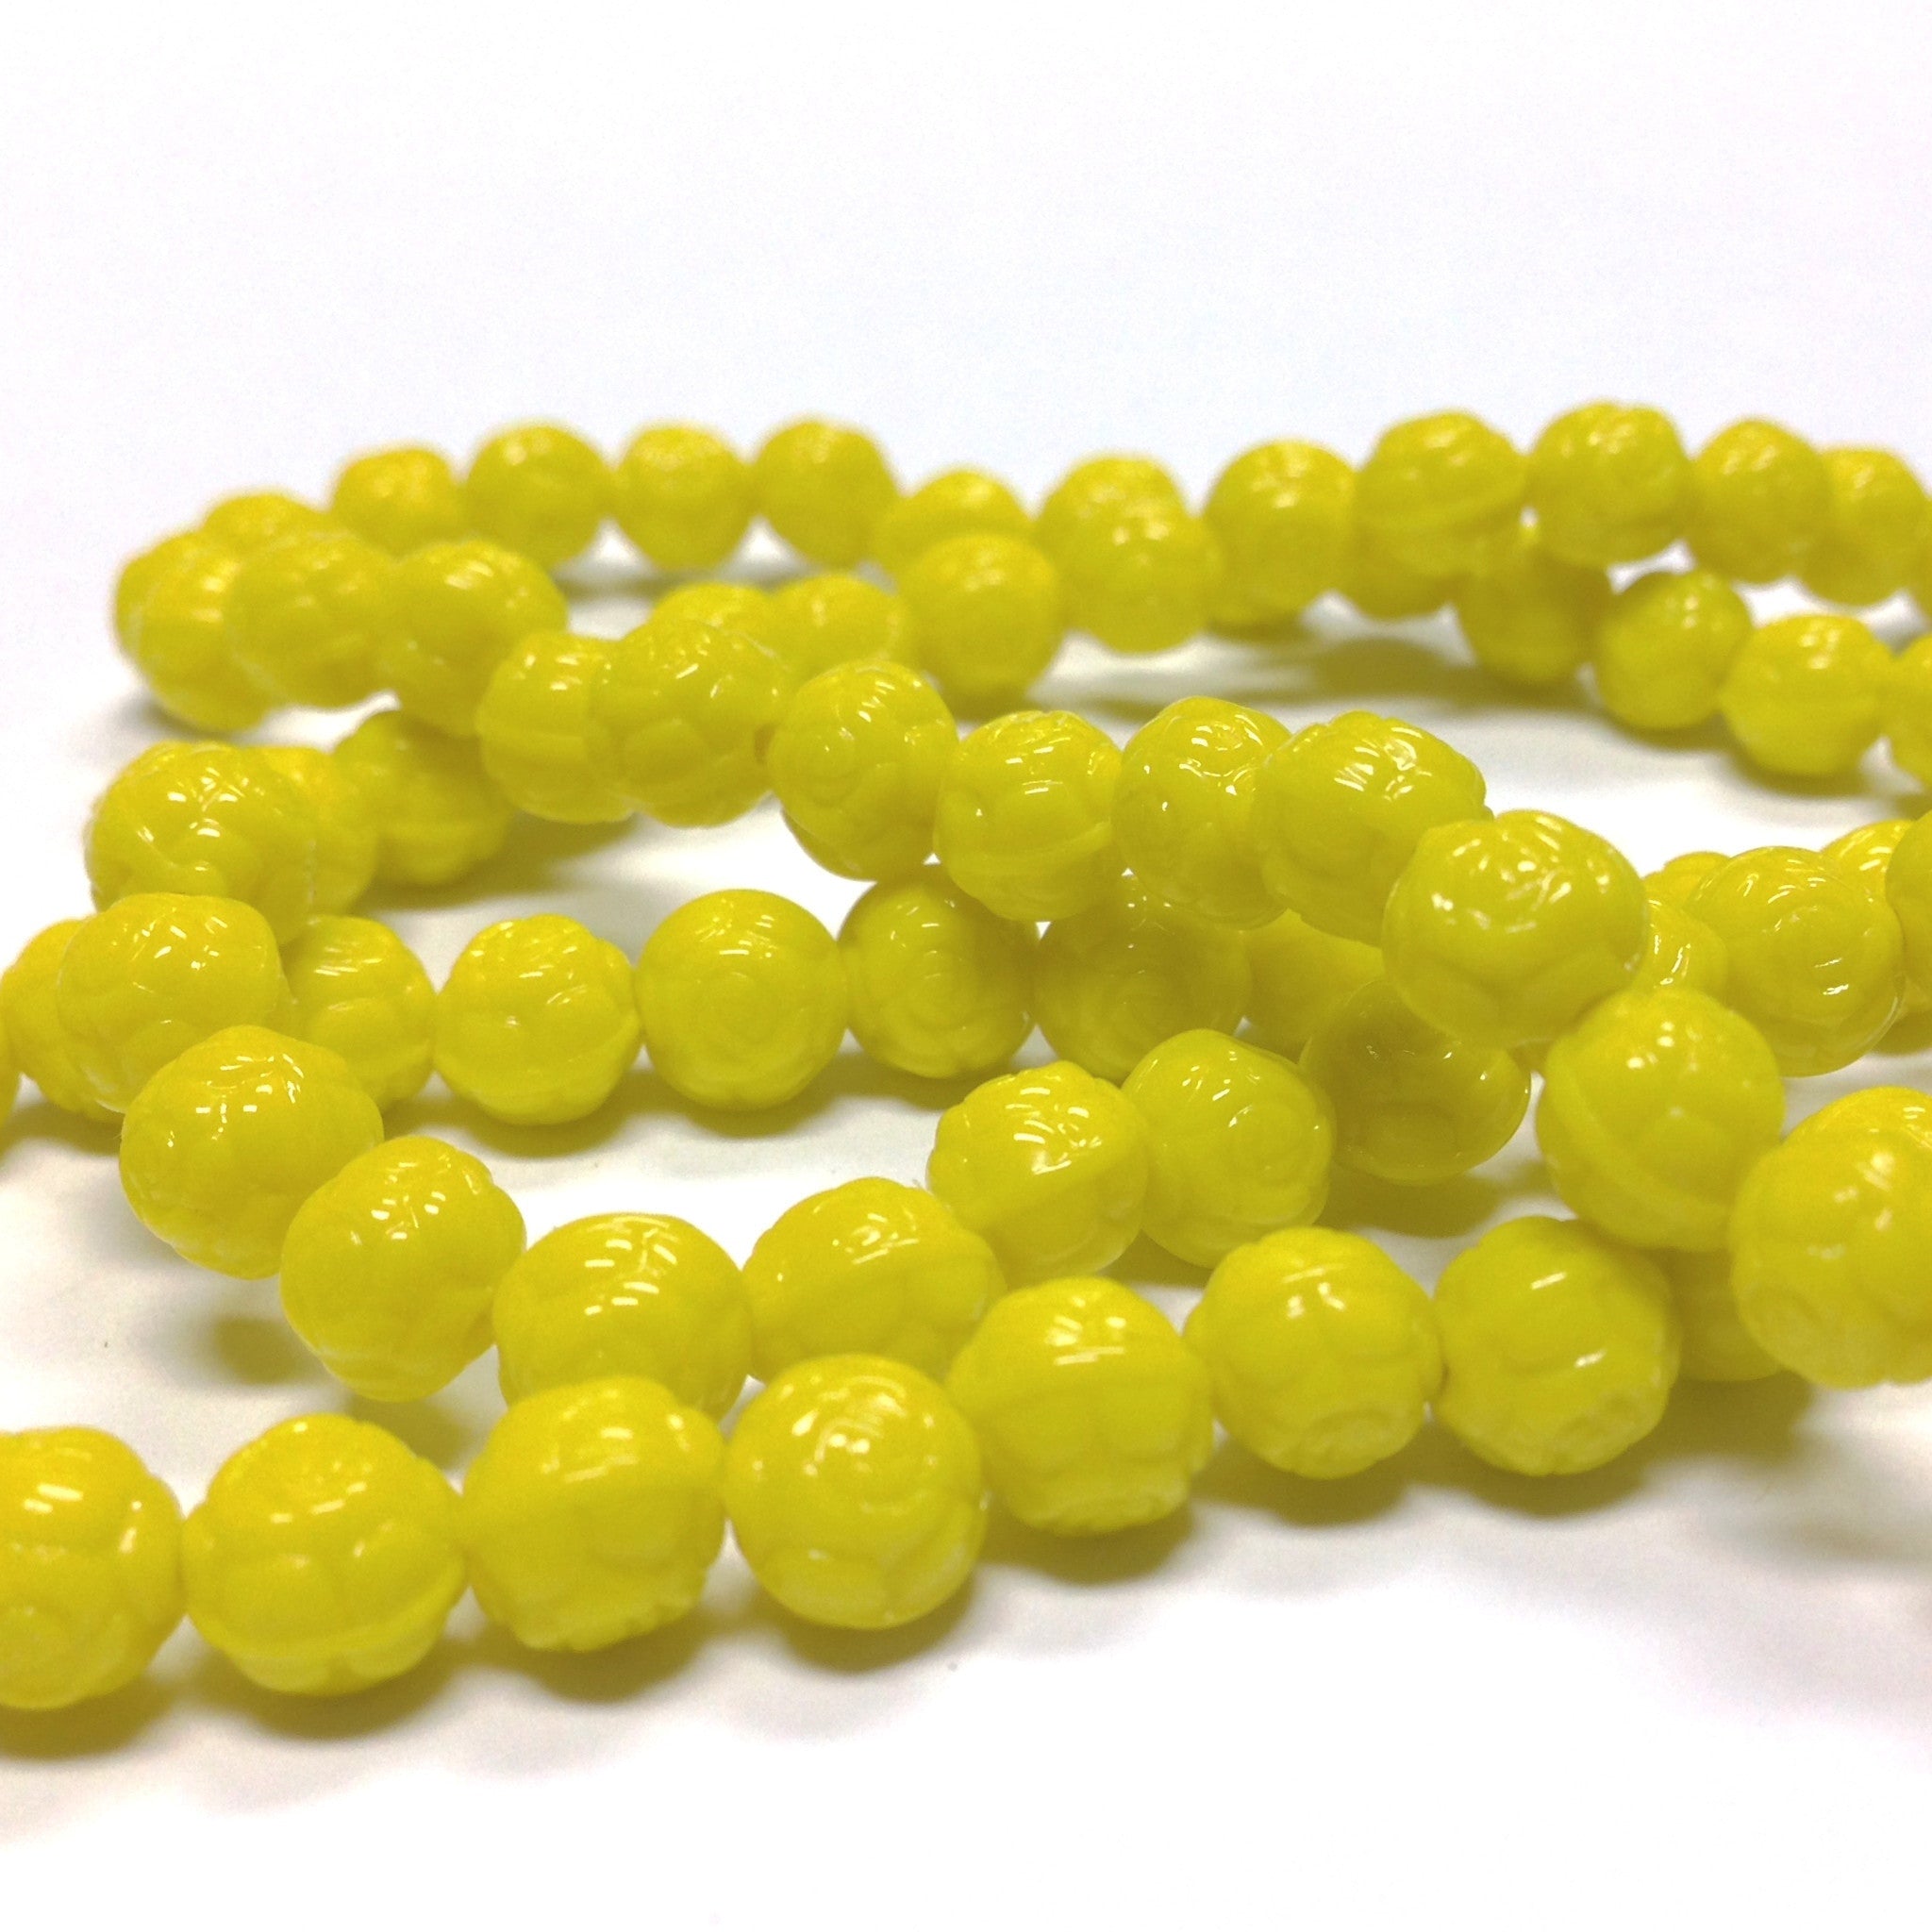 10mm Round Flat Beads, Acrylic Beads,mixed Color Beads,plastic Beads,spacer  Bead200 Pcs Set 